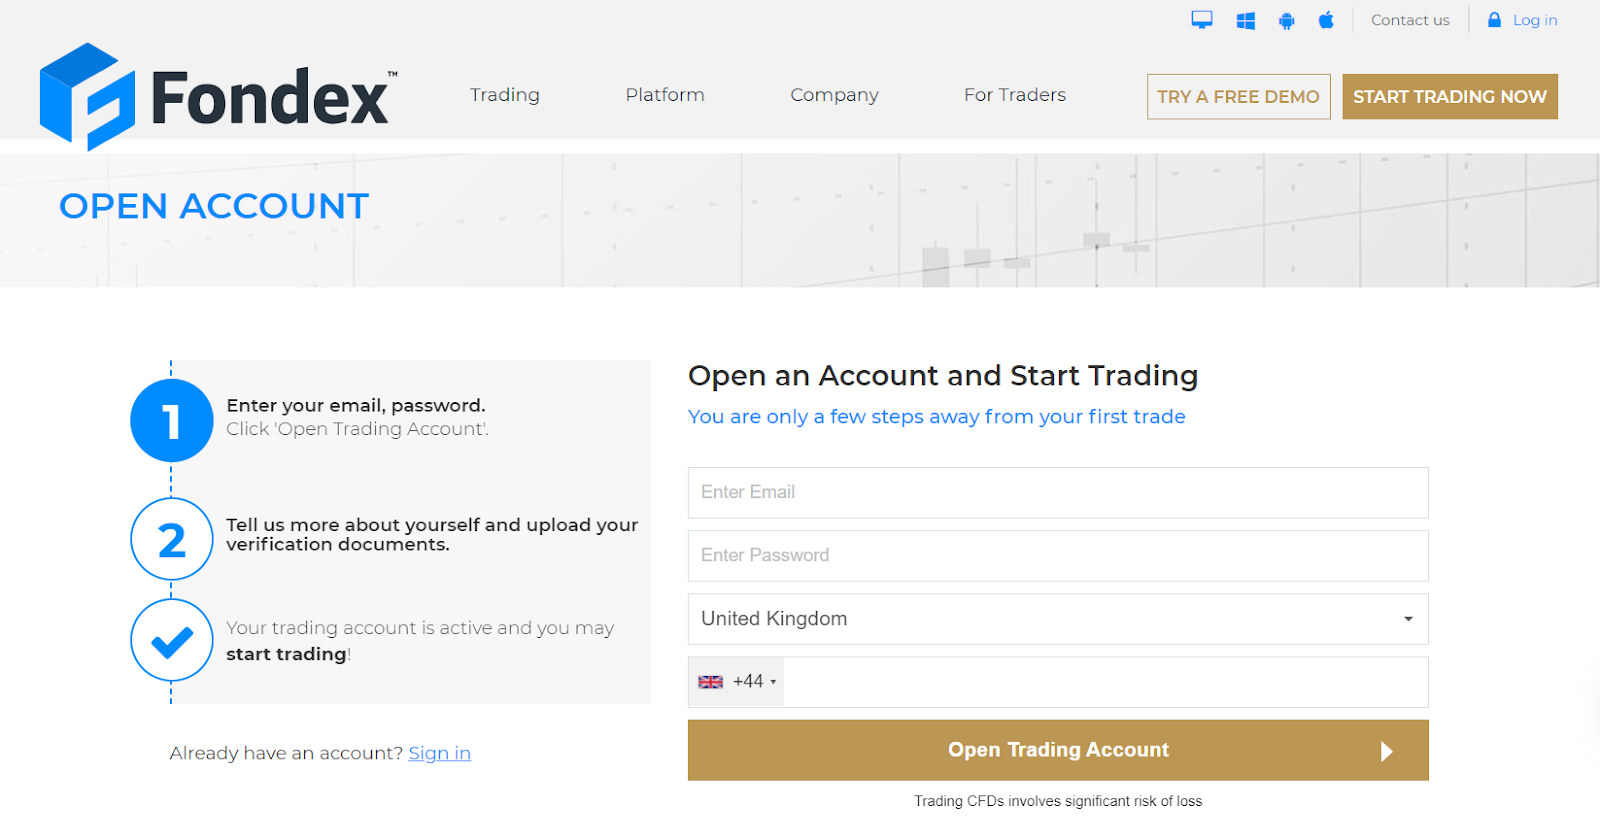 Review of Fondex - Open Trading Account